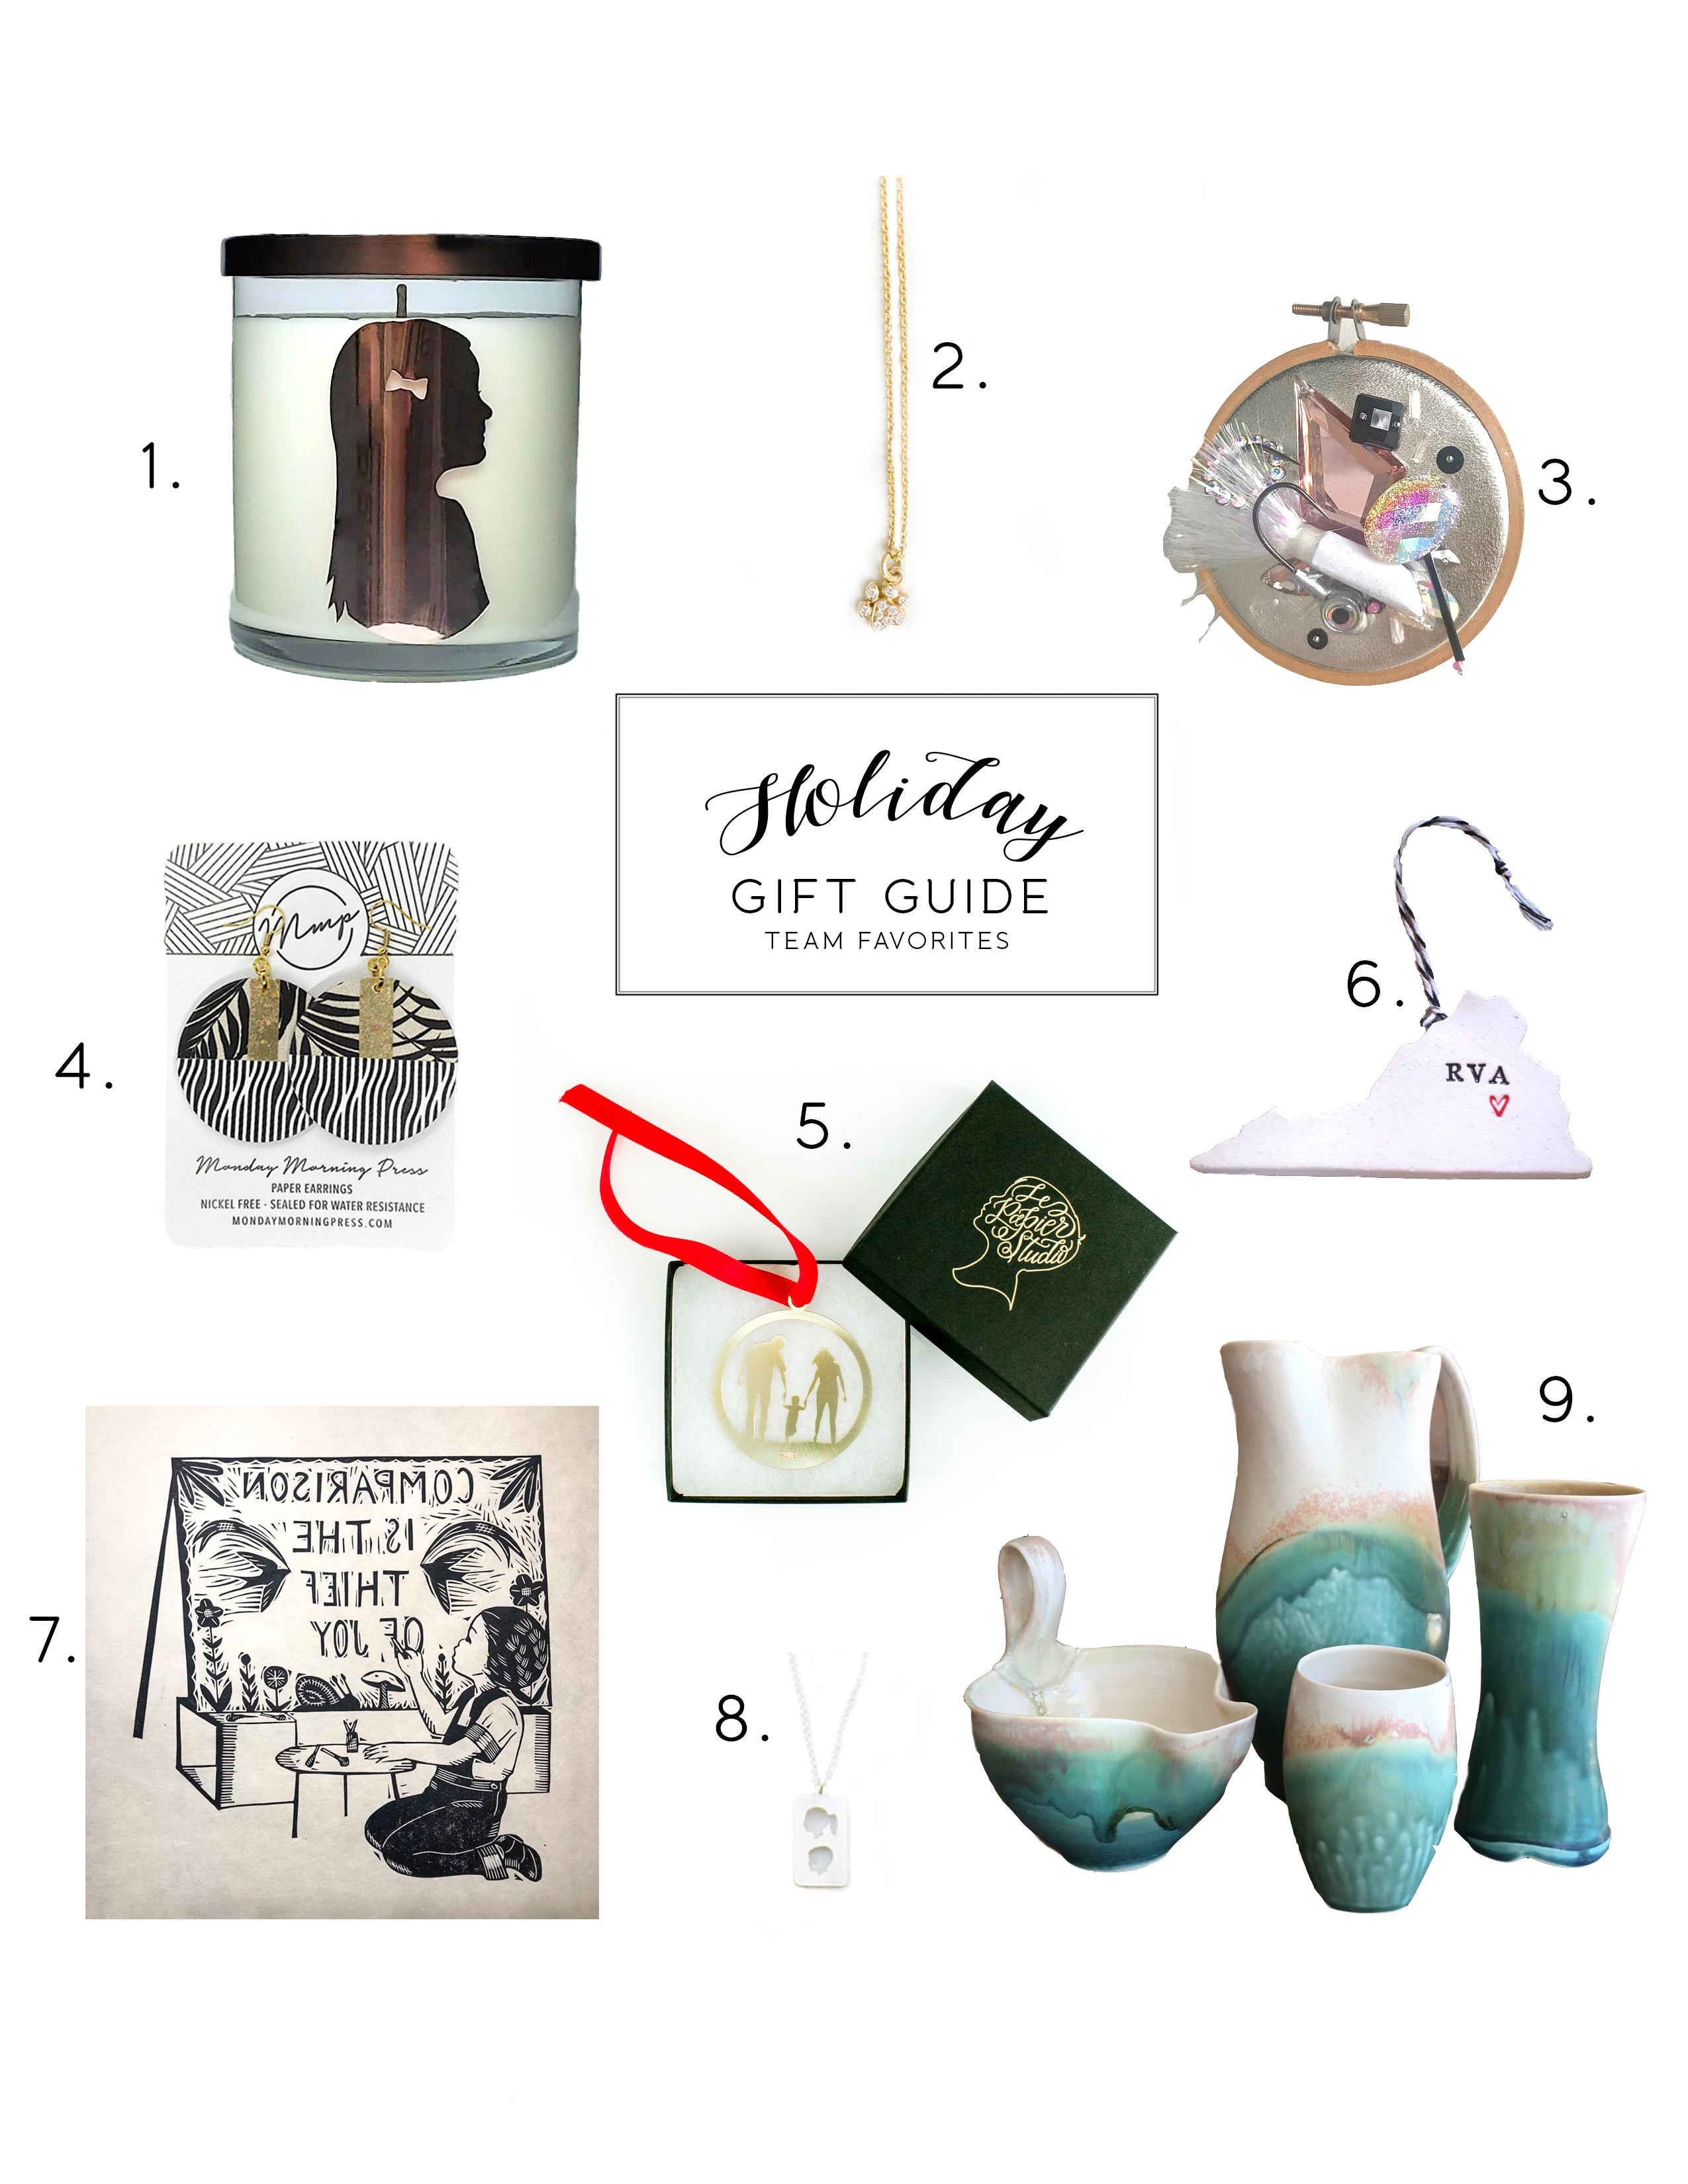 The LPS Team 2020 Holiday Gift Guide